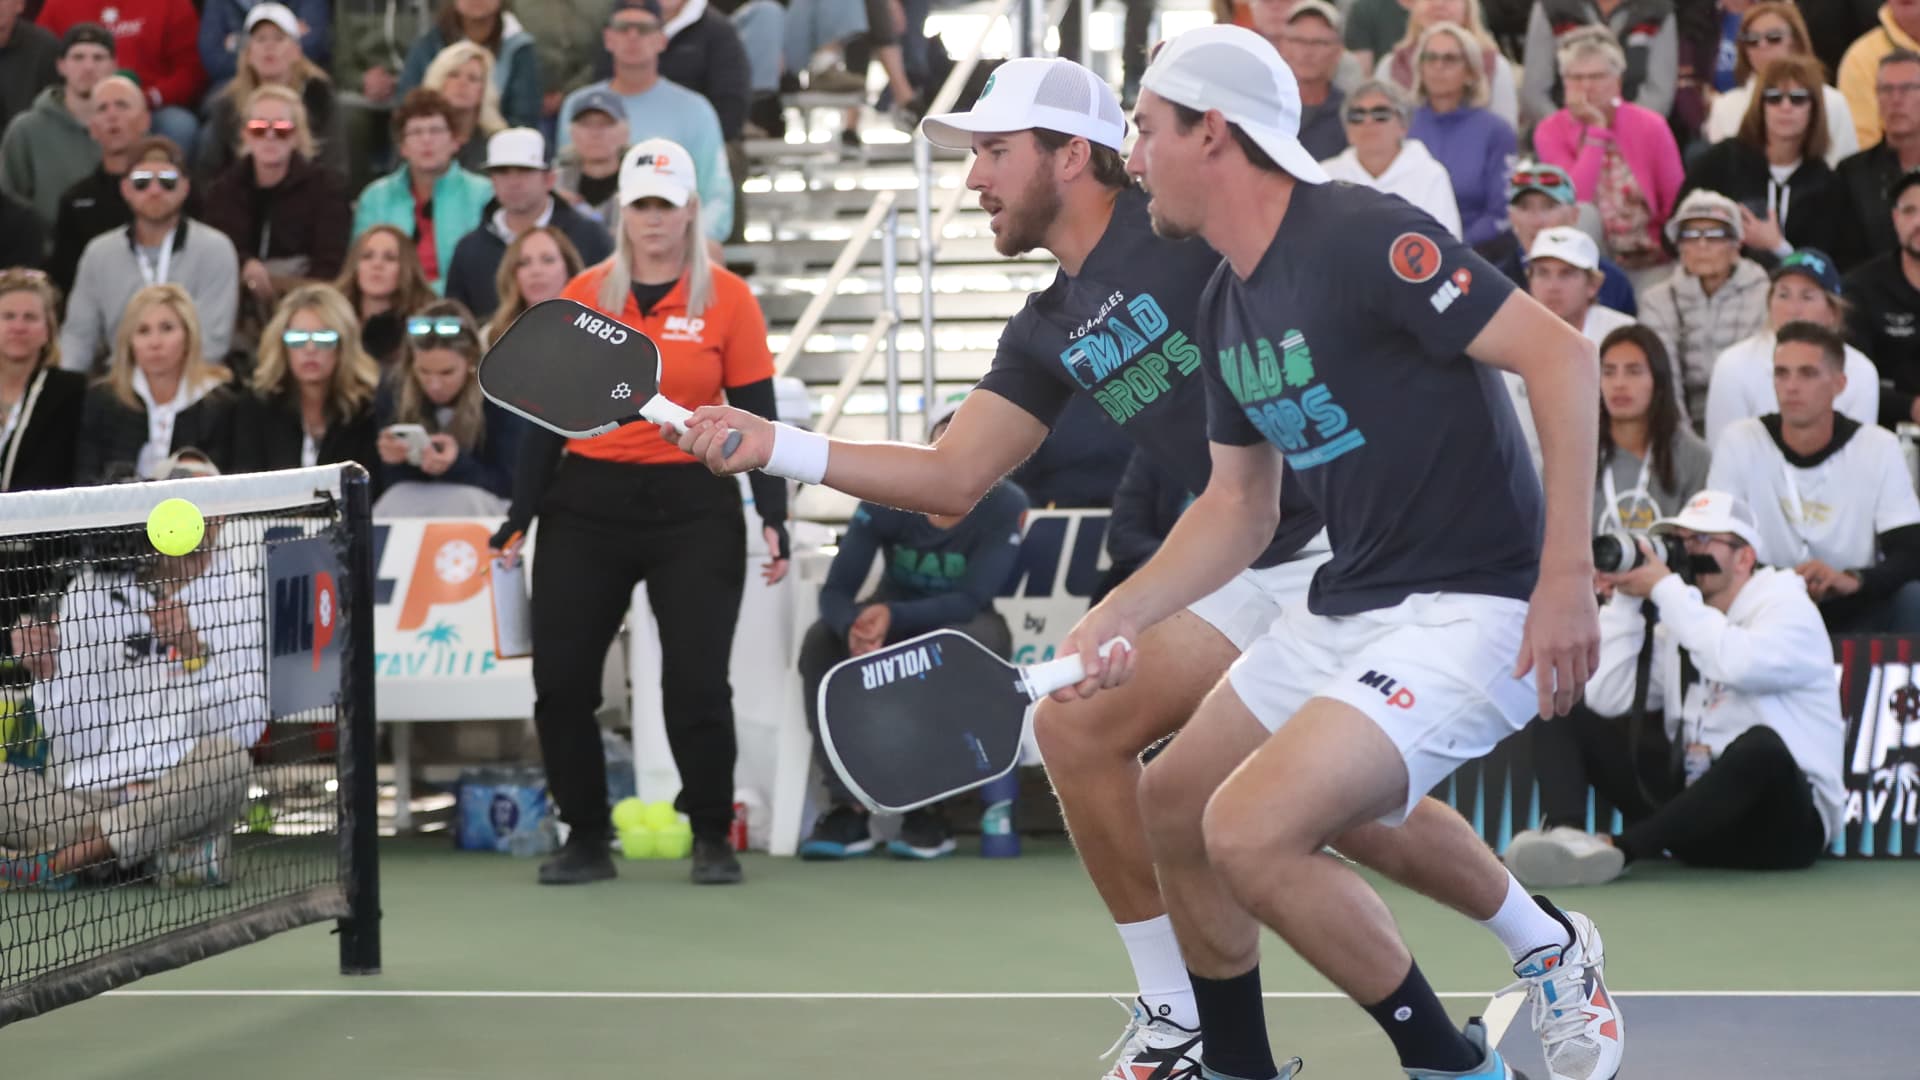 Major League Pickleball asks players to take 40% pay cut